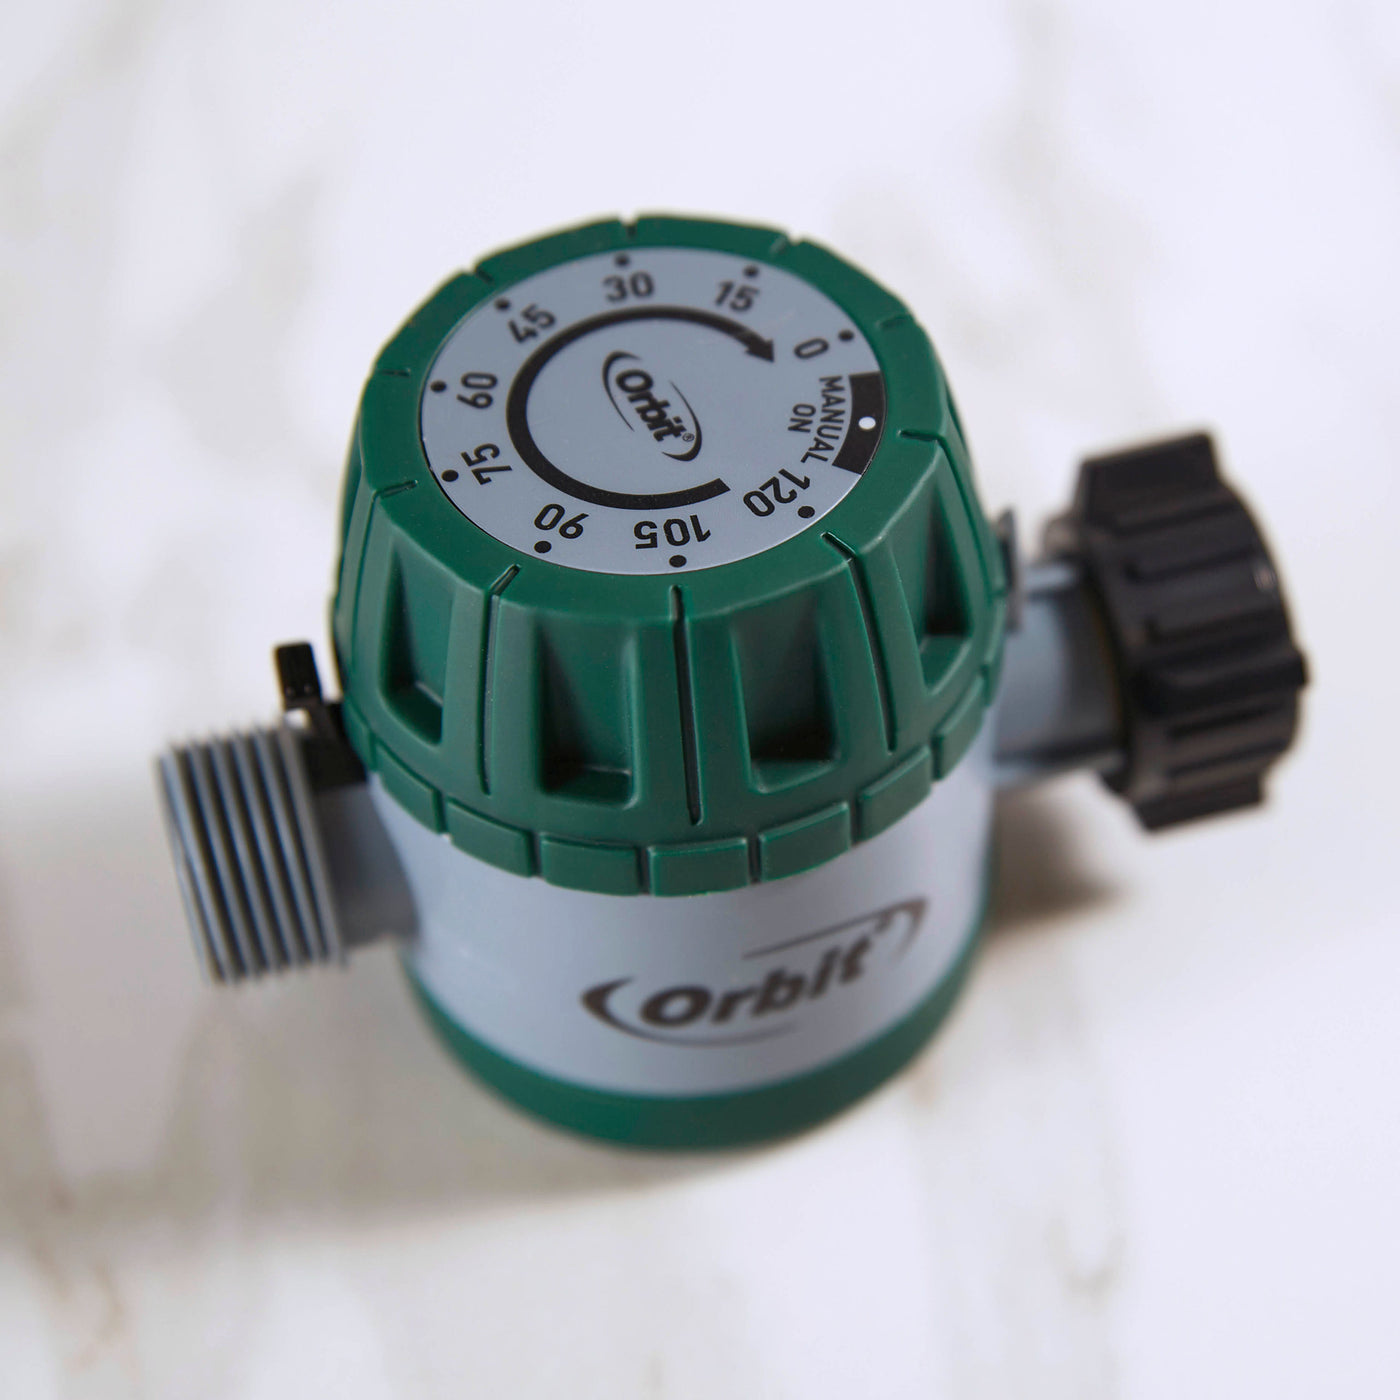 62034 - Orbit mechanical water timer has an oversized dial with comfort grip for easy use.